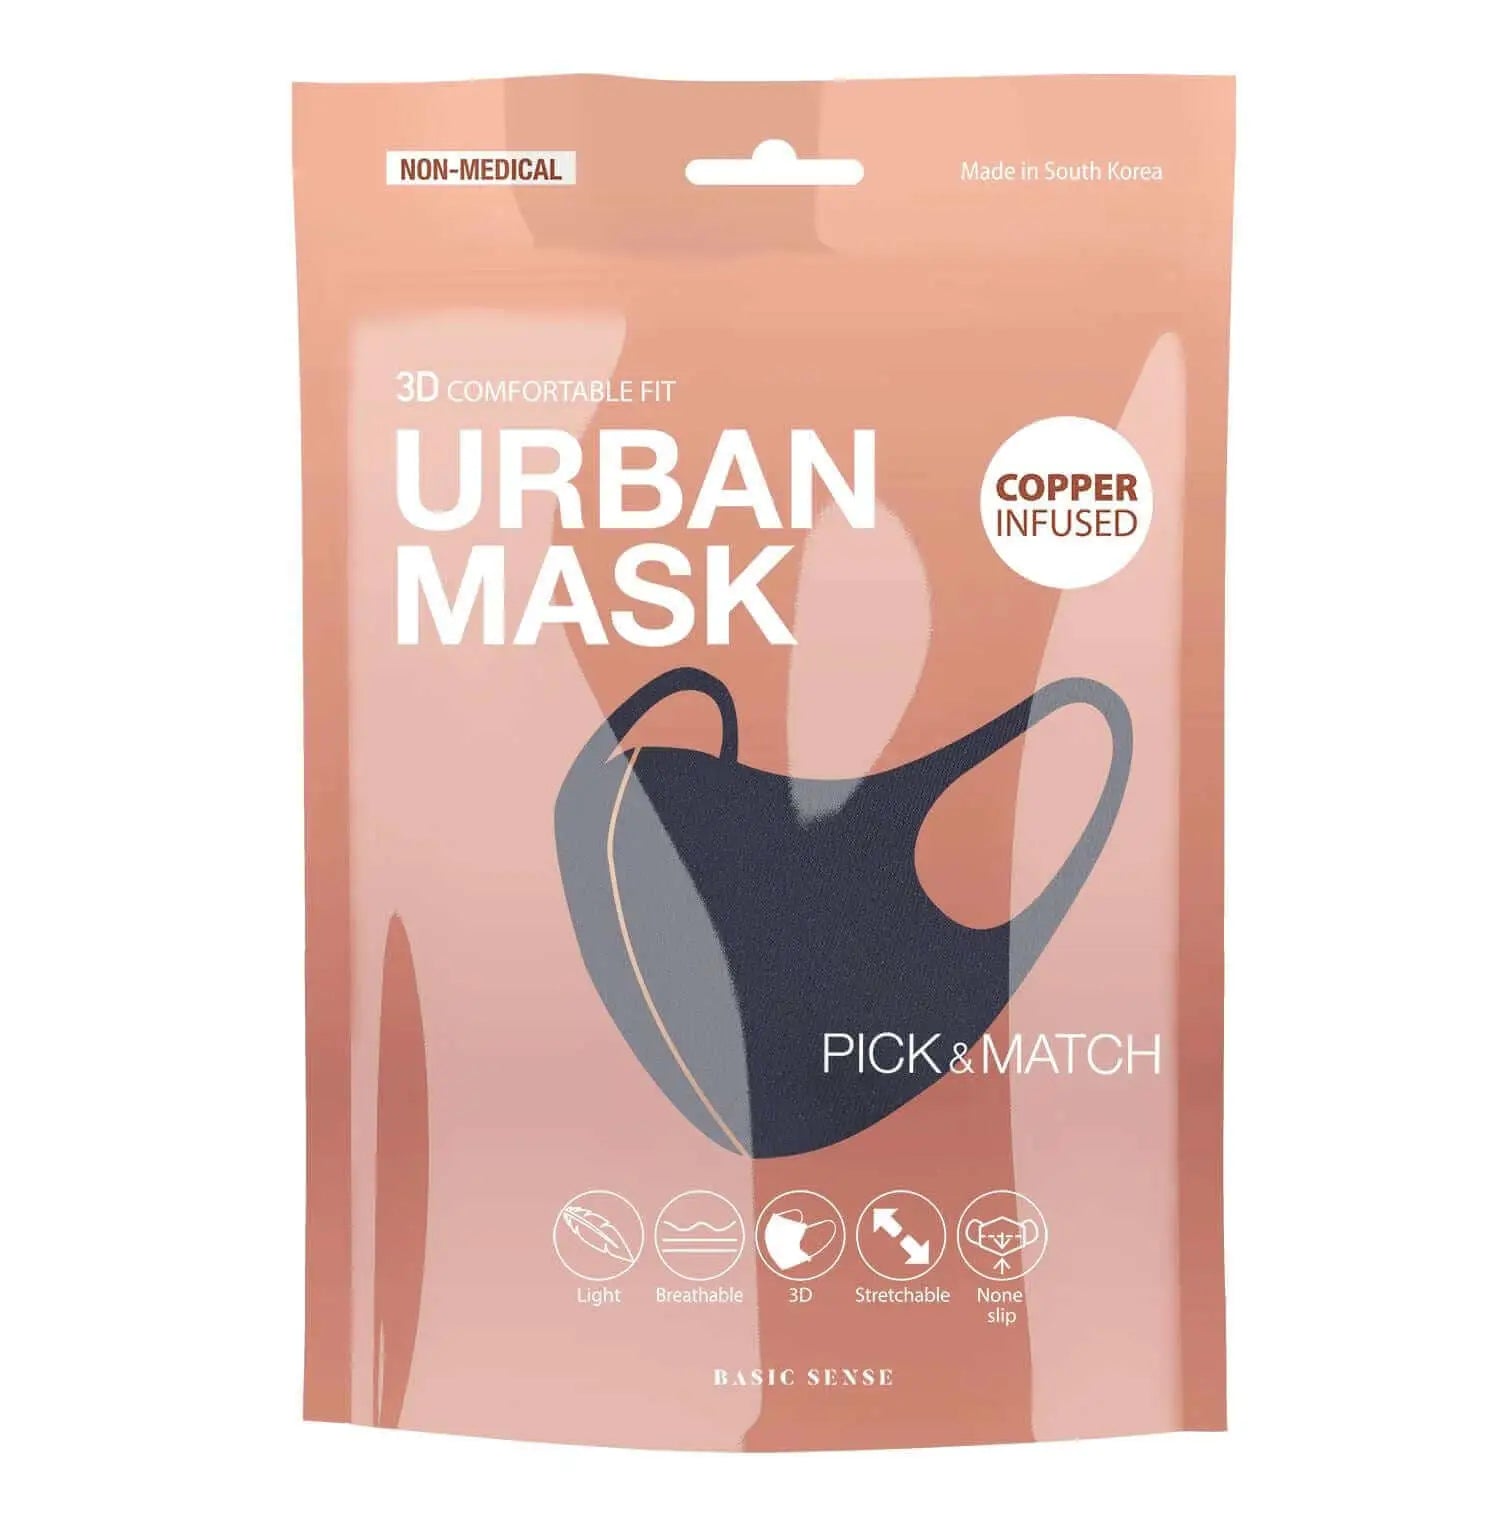 3D Copper-Infused Black Urban Mask for Stylish Protection